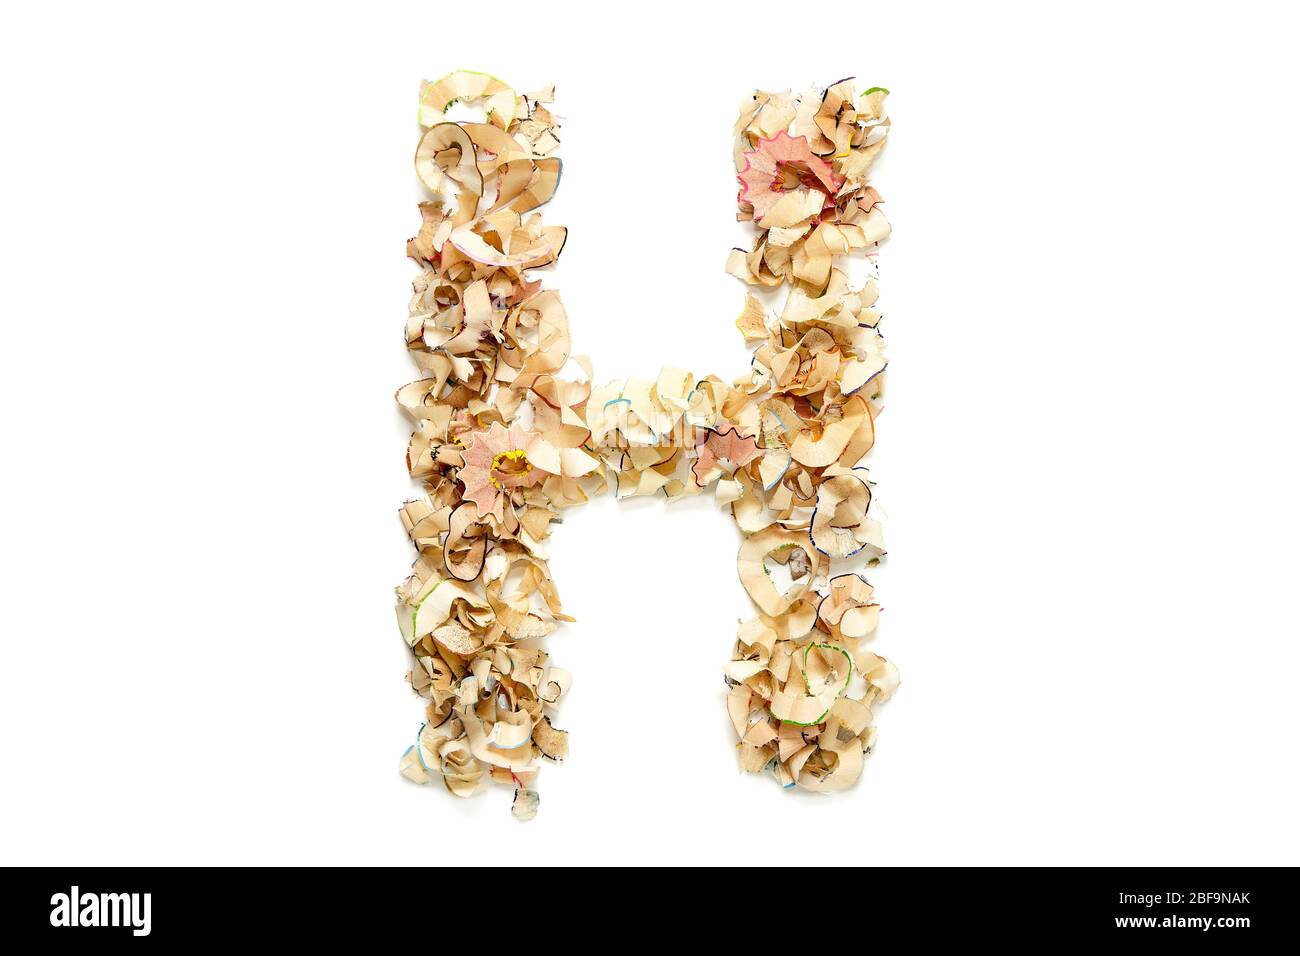 Letter H made from coloured pencil shavings for use in your design. Stock Photo